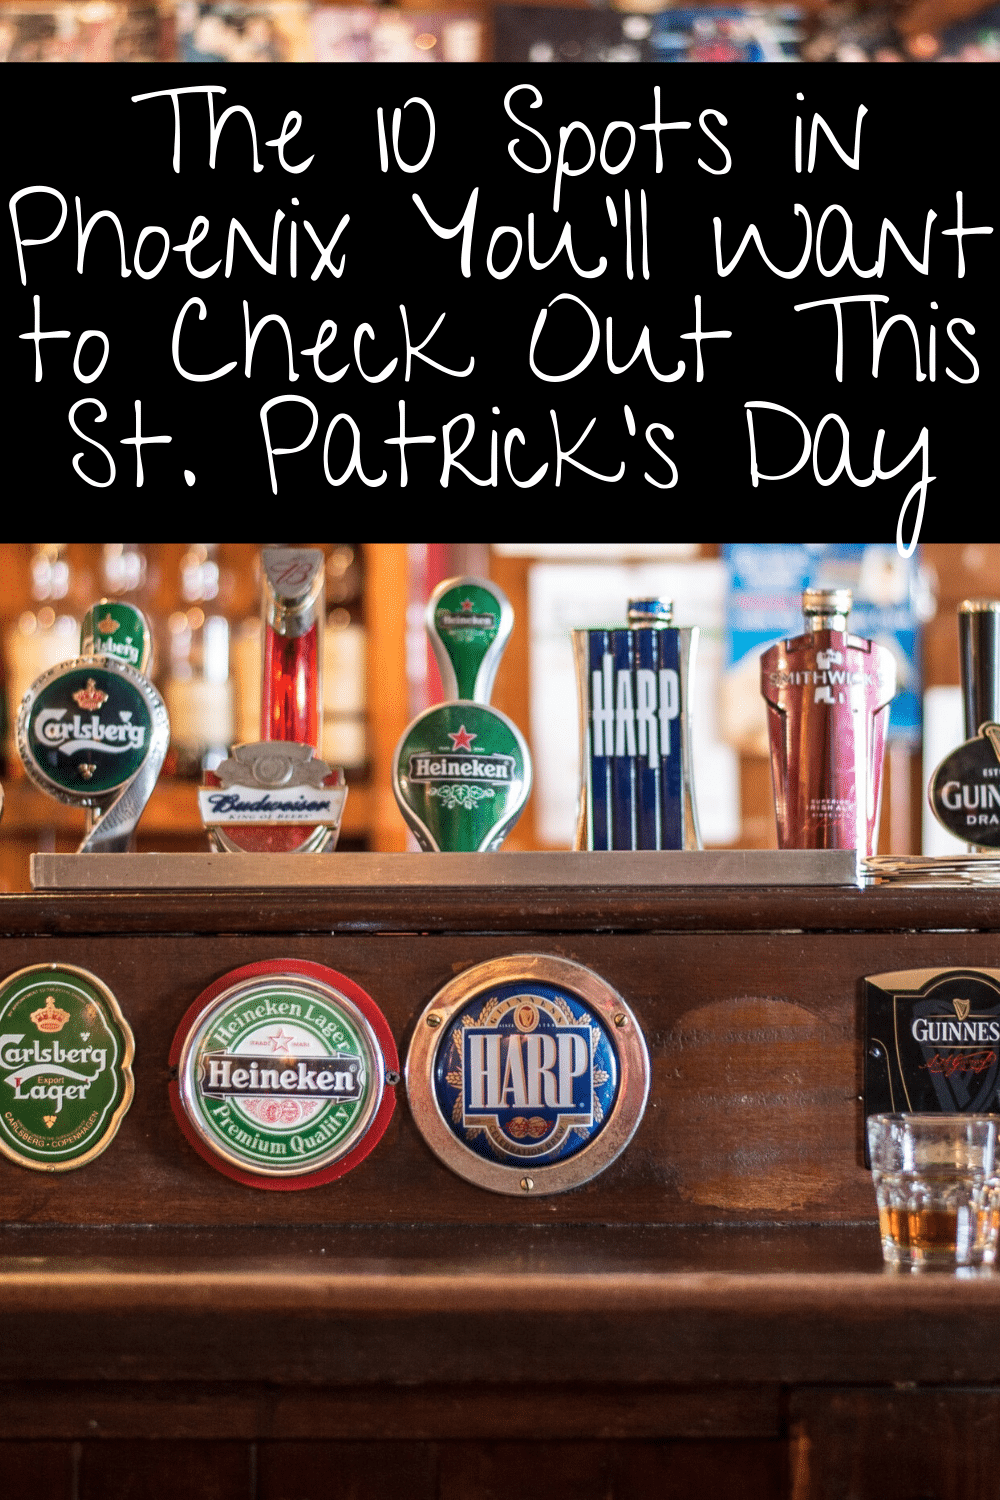 It's that time of year...St. Patrick's Day in Phoenix is just around the corner. If you are looking for Irish pubs in Phoenix to check out, we've got you covered.